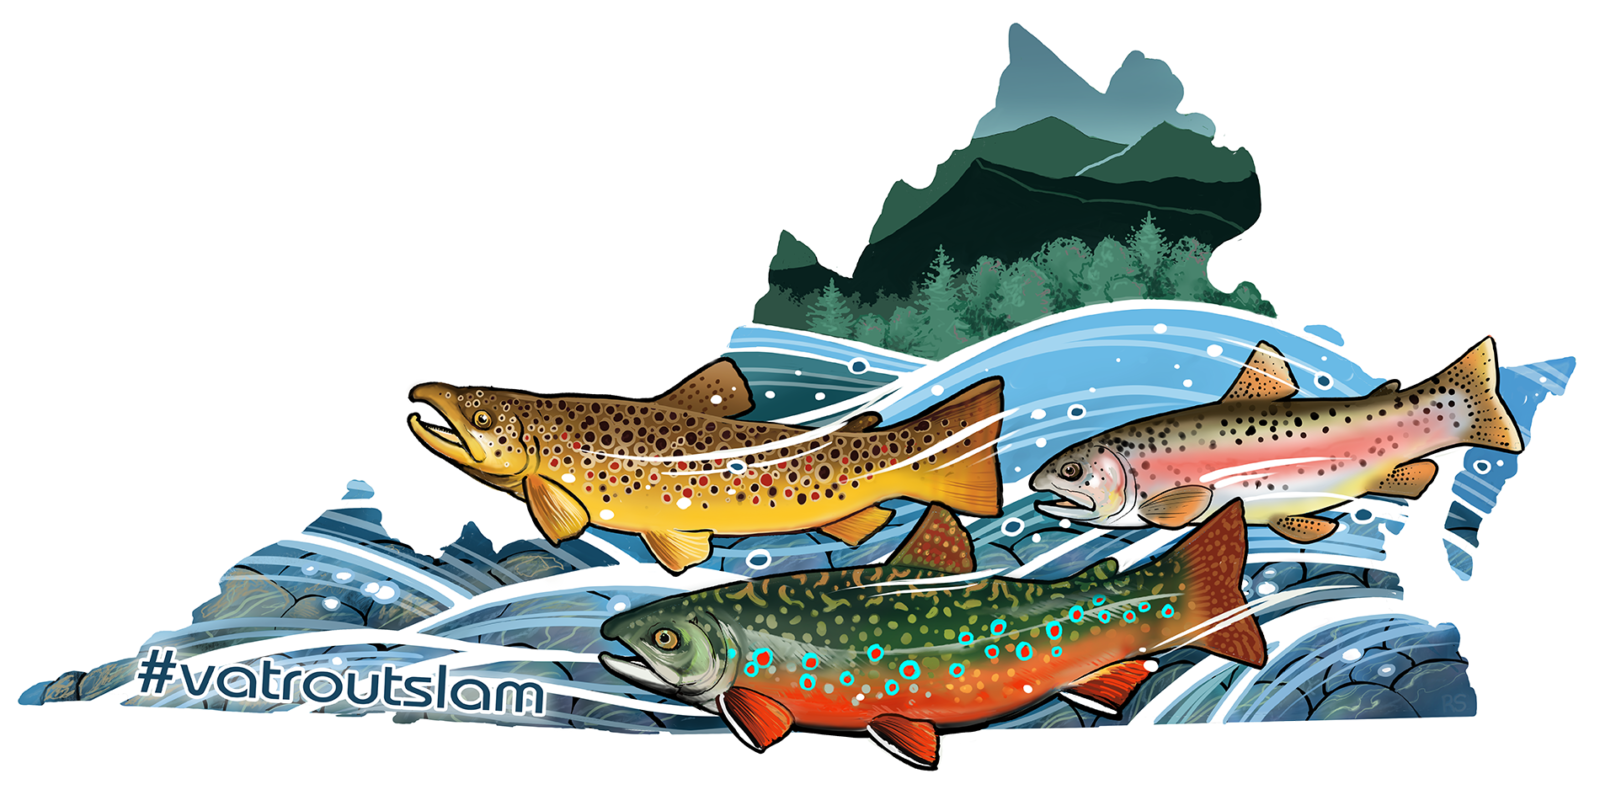 An piece of artwork by Ron Shearer of three trout in a steam near a forest shaped like the state of Virginia with on the lower left hand side a hashtag labeled "VA trout slam"